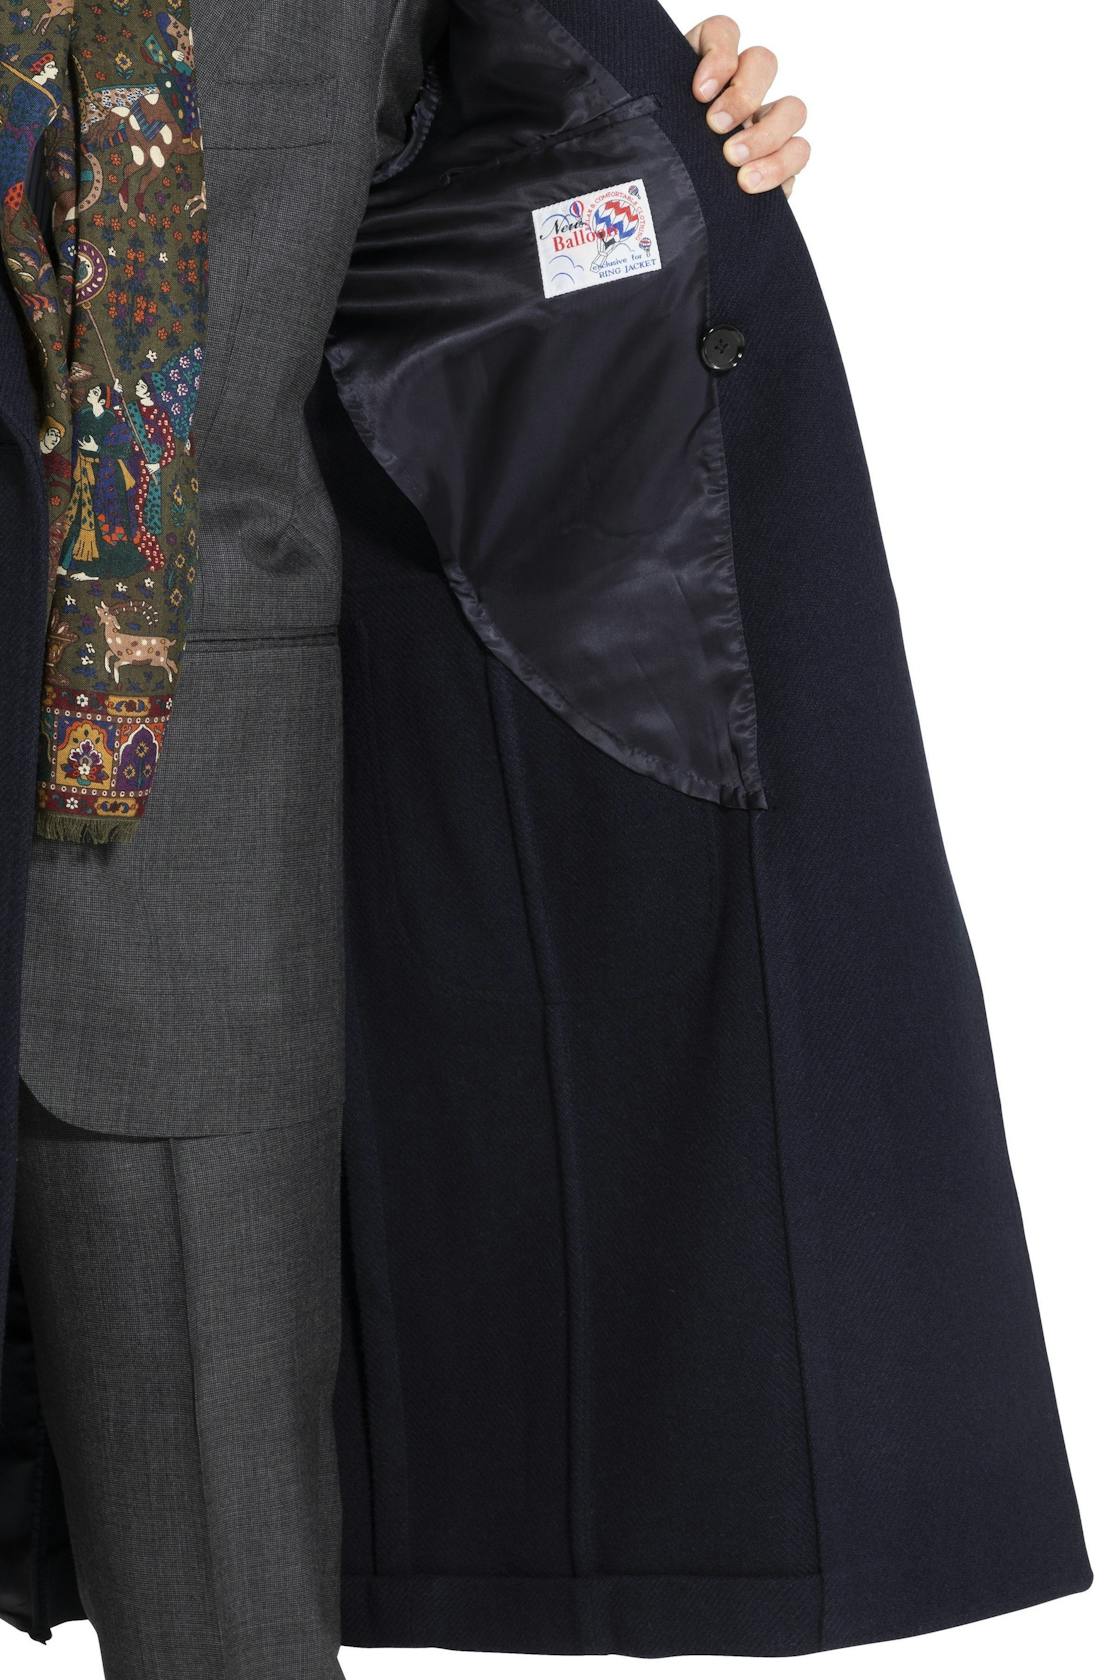 The Armoury by Ring Jacket RC66 Navy Wool Balloon Twill DB Overcoat